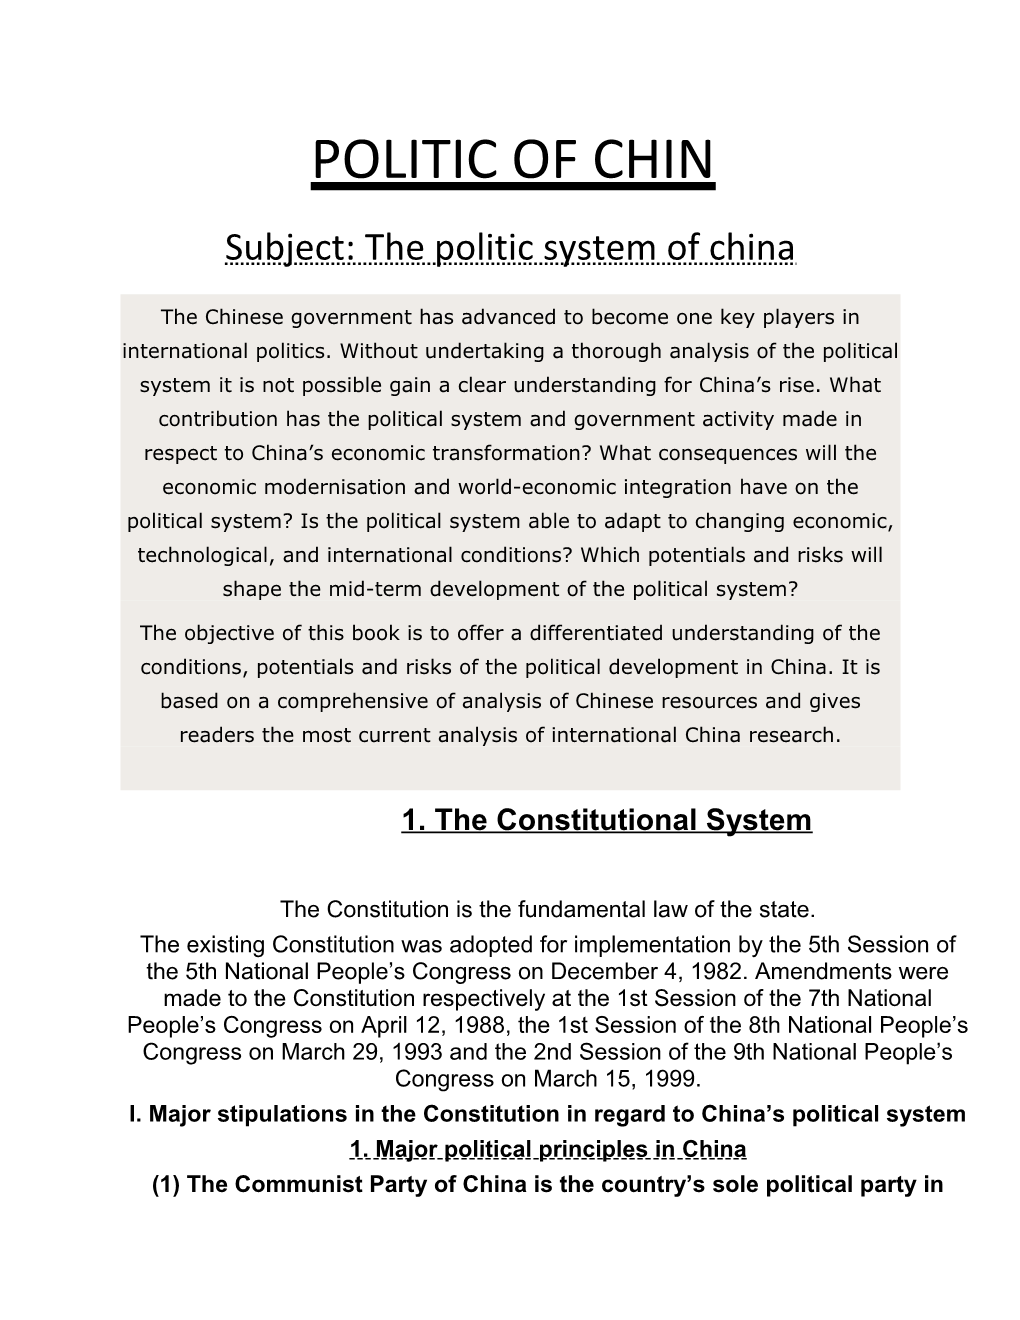 Subject: the Politic System of China